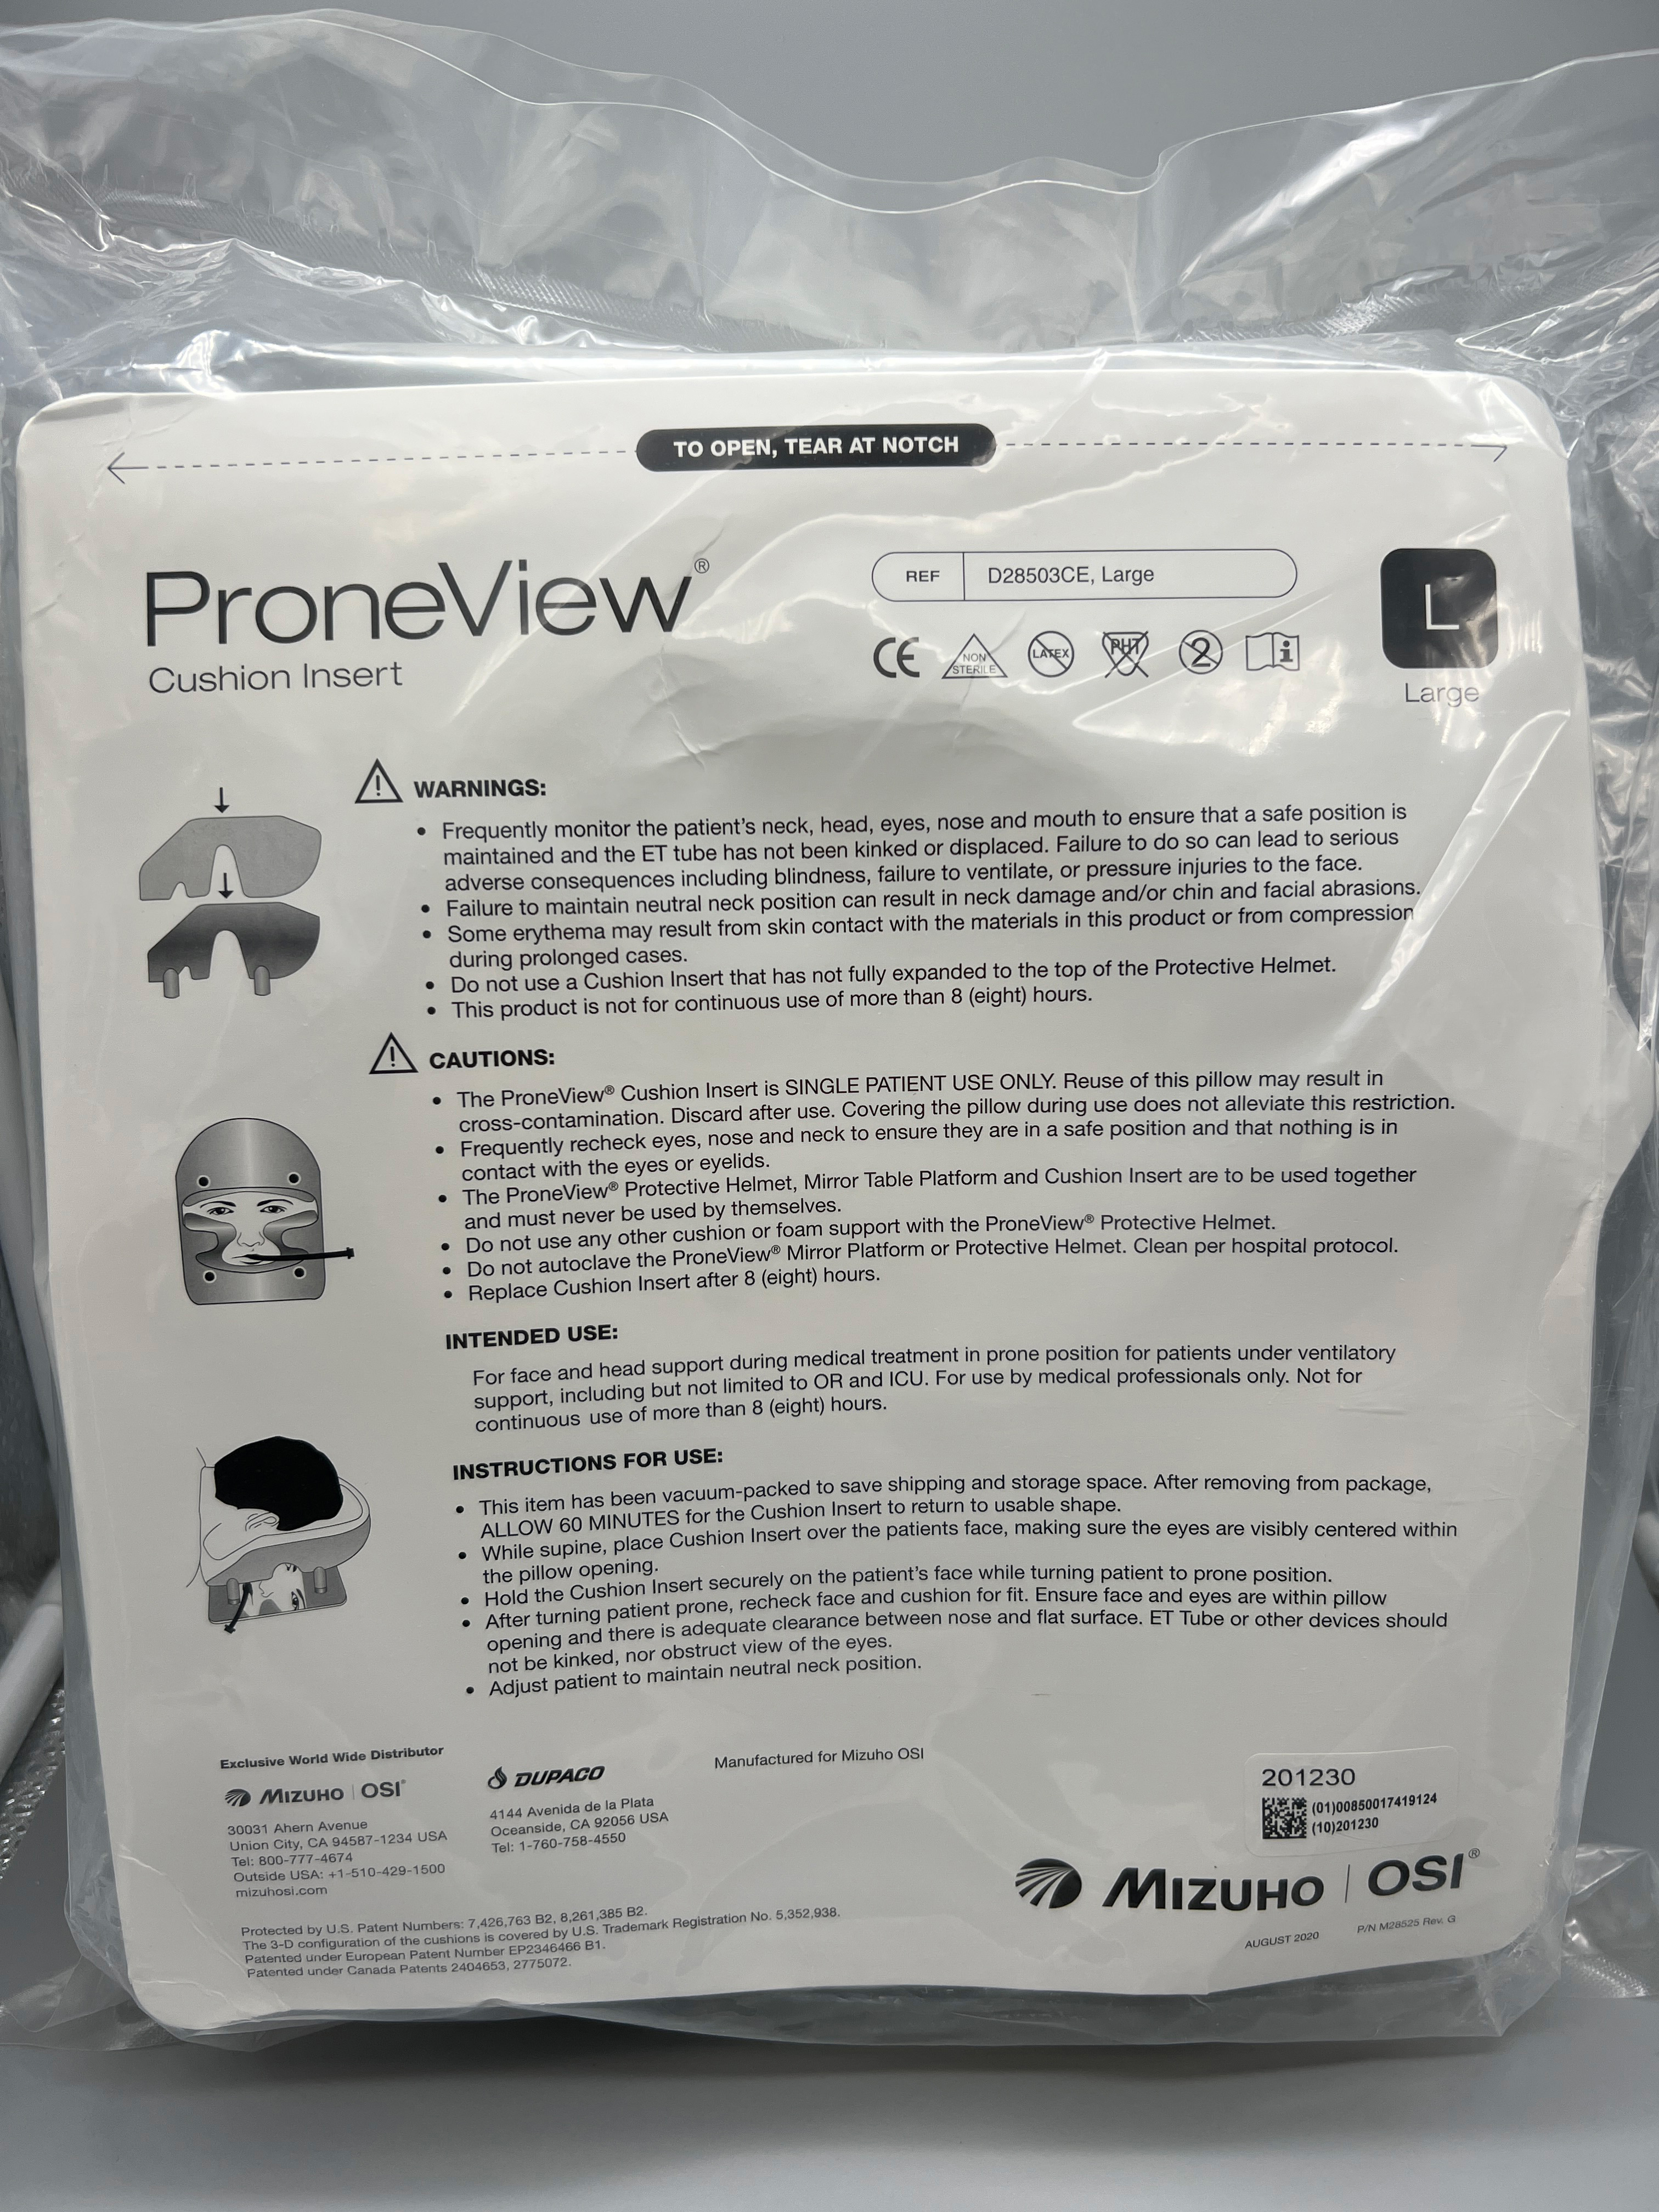 PRONEVIEW CUSHION INSERT FOR FACE AND HEAD SUPPORT DURING MEDICAL TREATMENT IN PRONE POSTION FOR PATIENTS